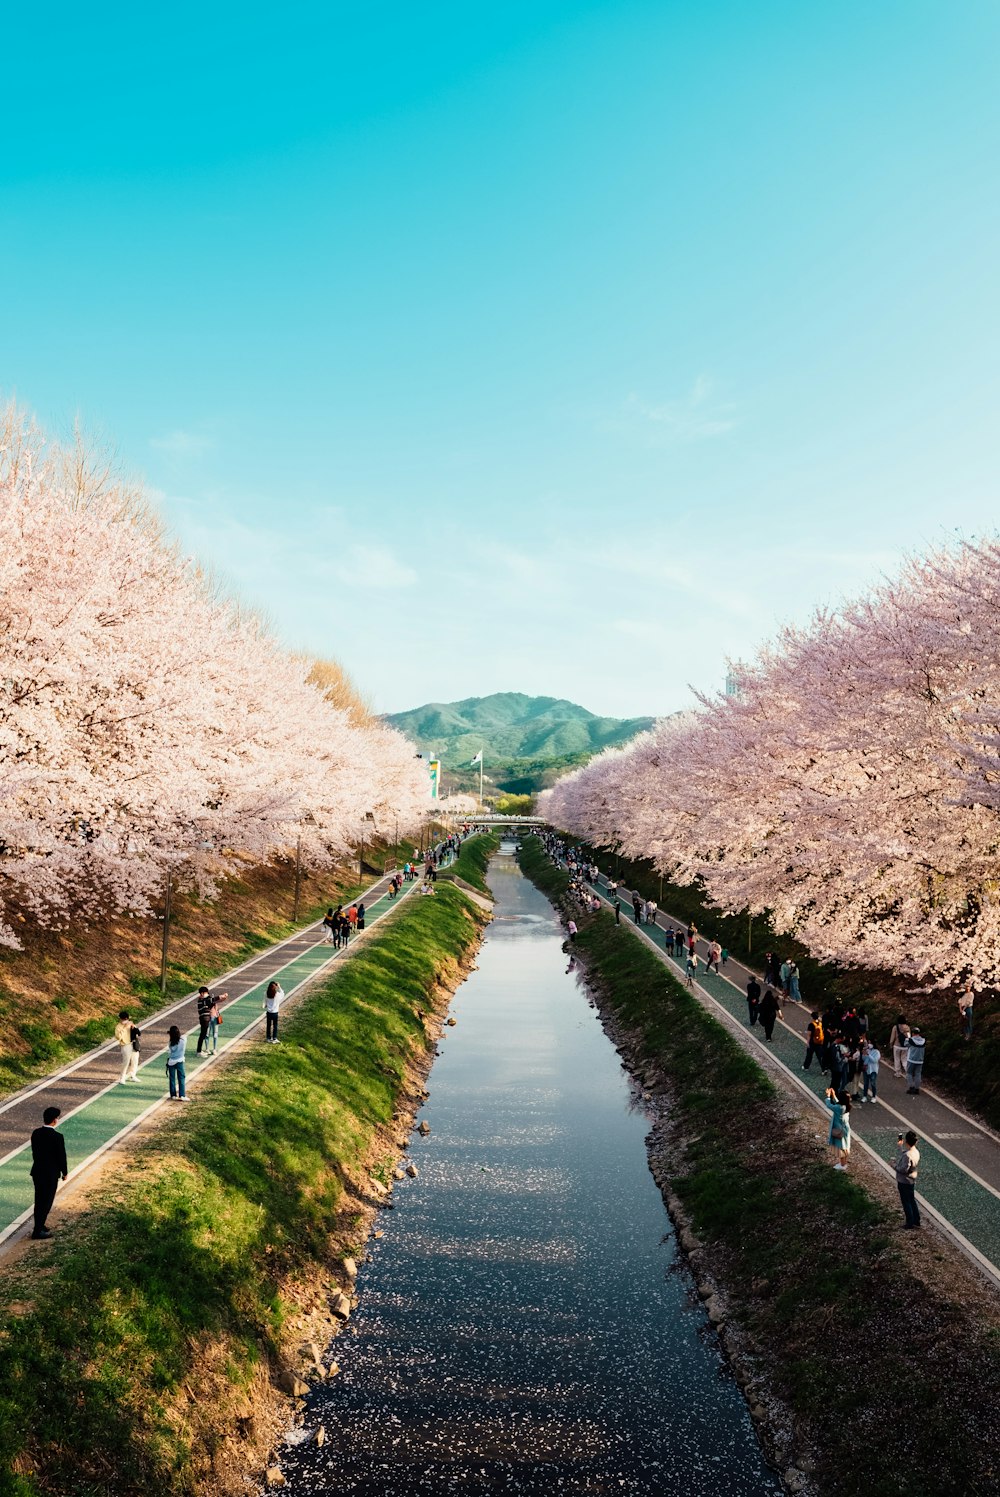 people walking along a river lined with cherry blossom trees